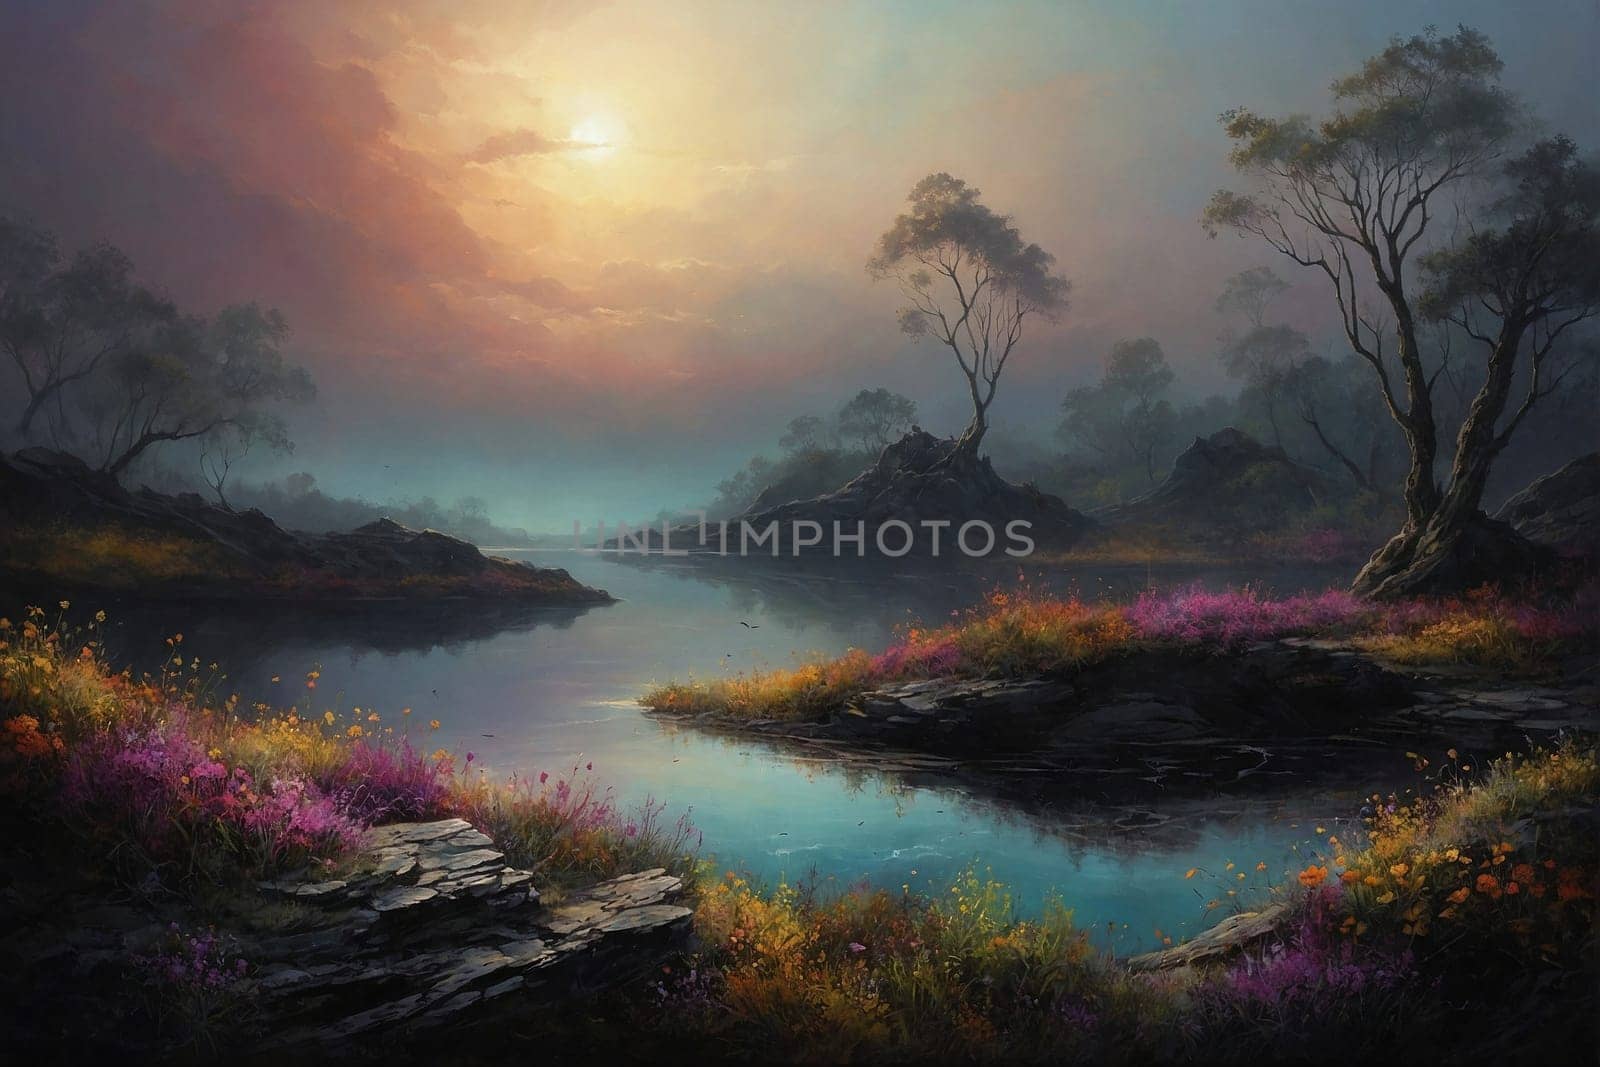 The sun sets, casting a soft glow over a calm lake bordered by blossoming wildflowers and silhouetted trees.